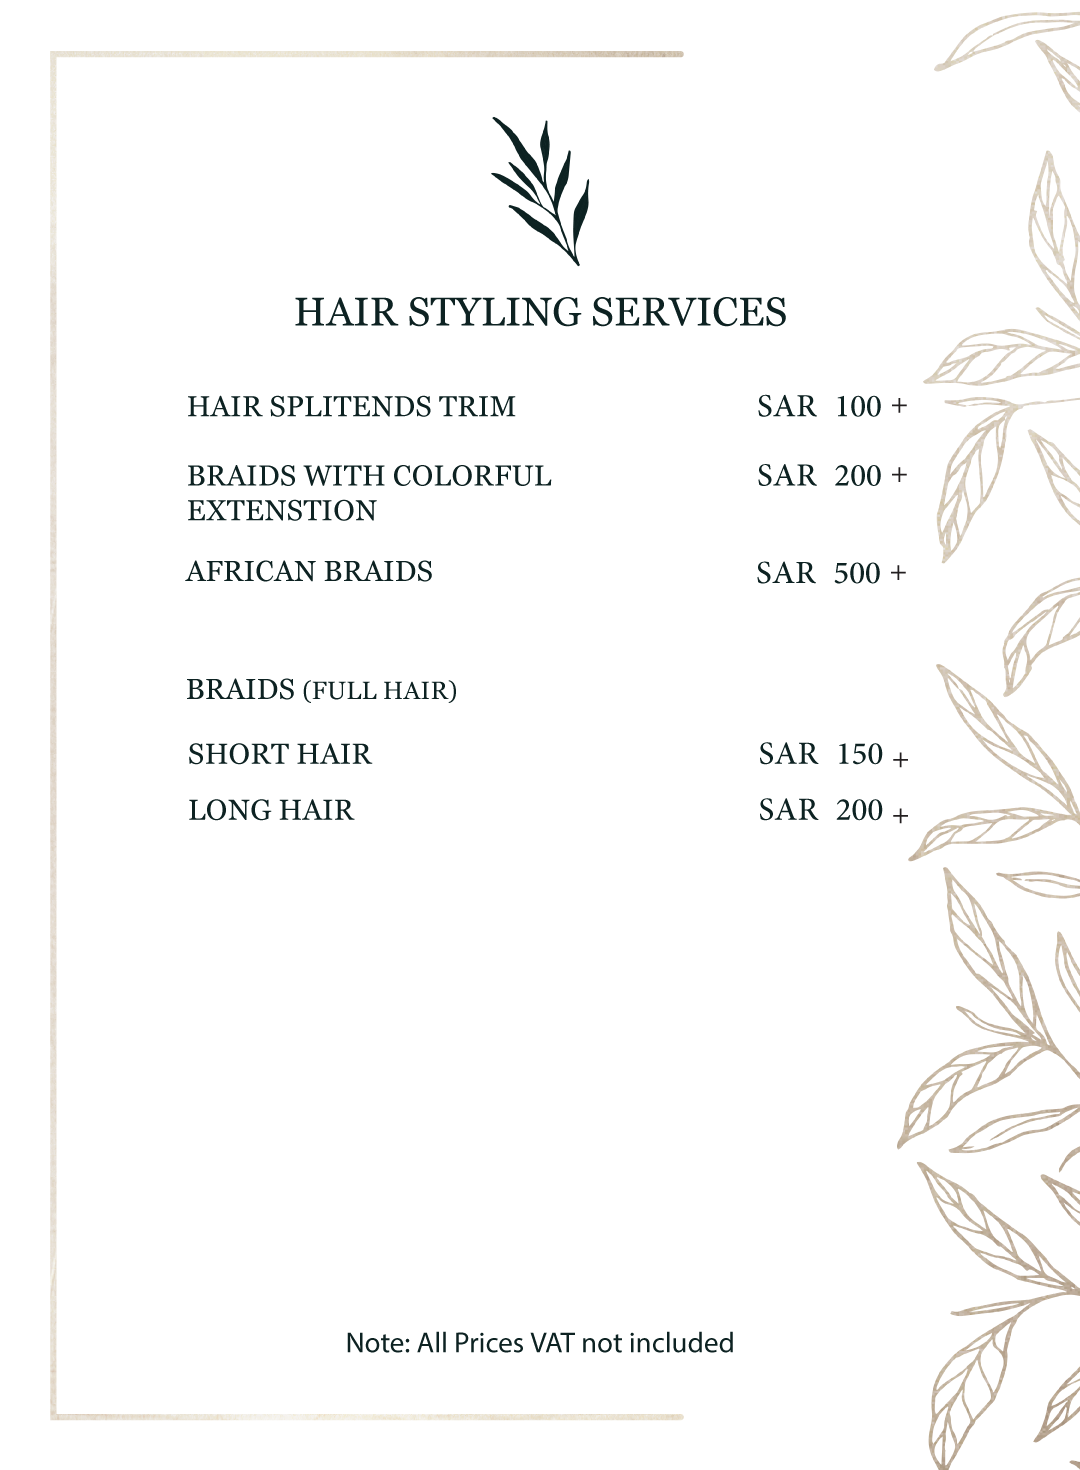 Hair-Styling-Services